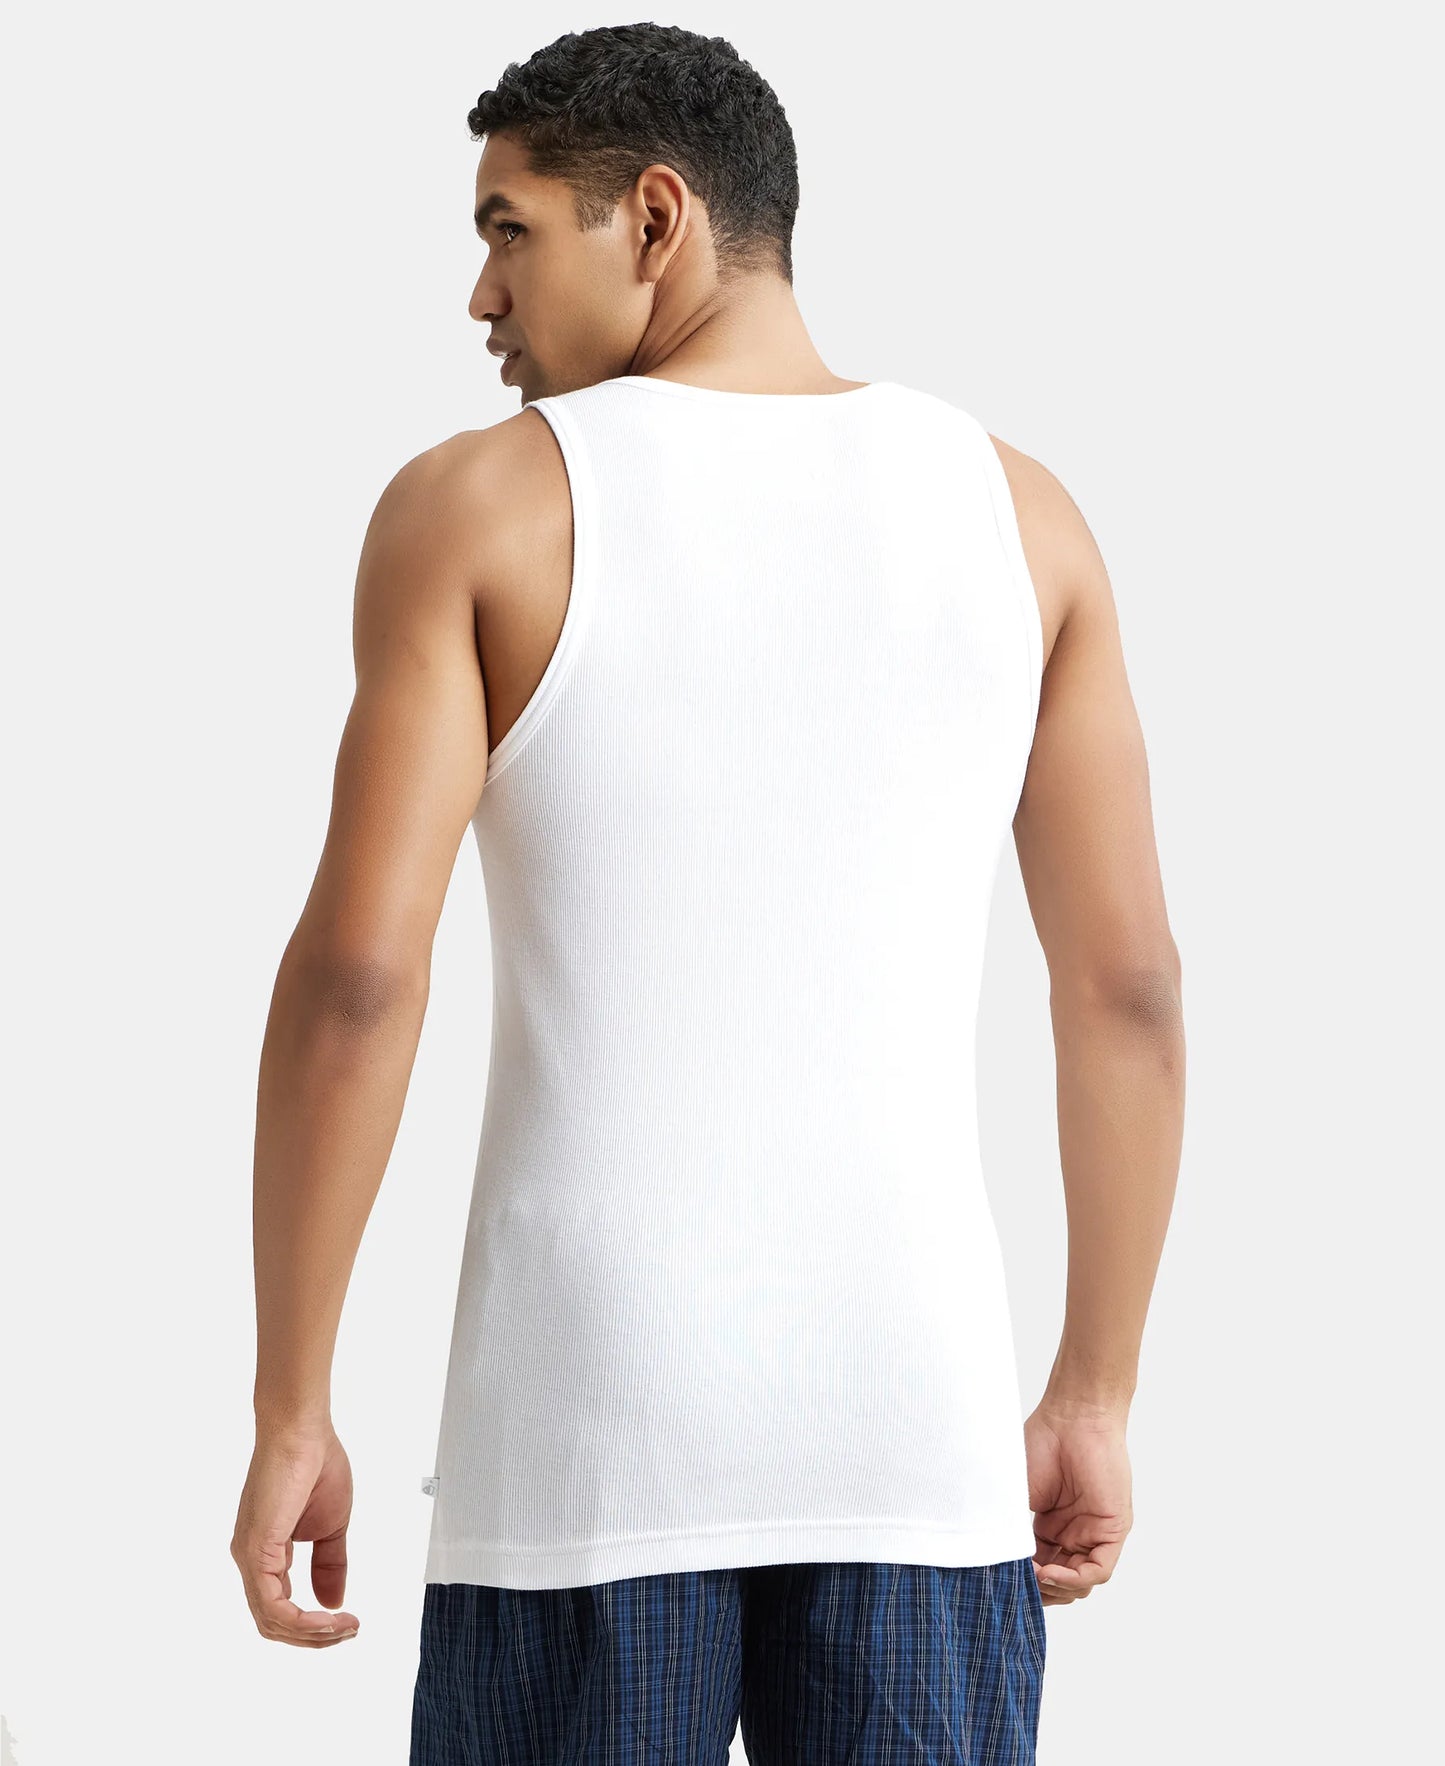 Super Combed Cotton Rib Round Neck Sleeveless Vest with Stay Fresh Properties - White-4